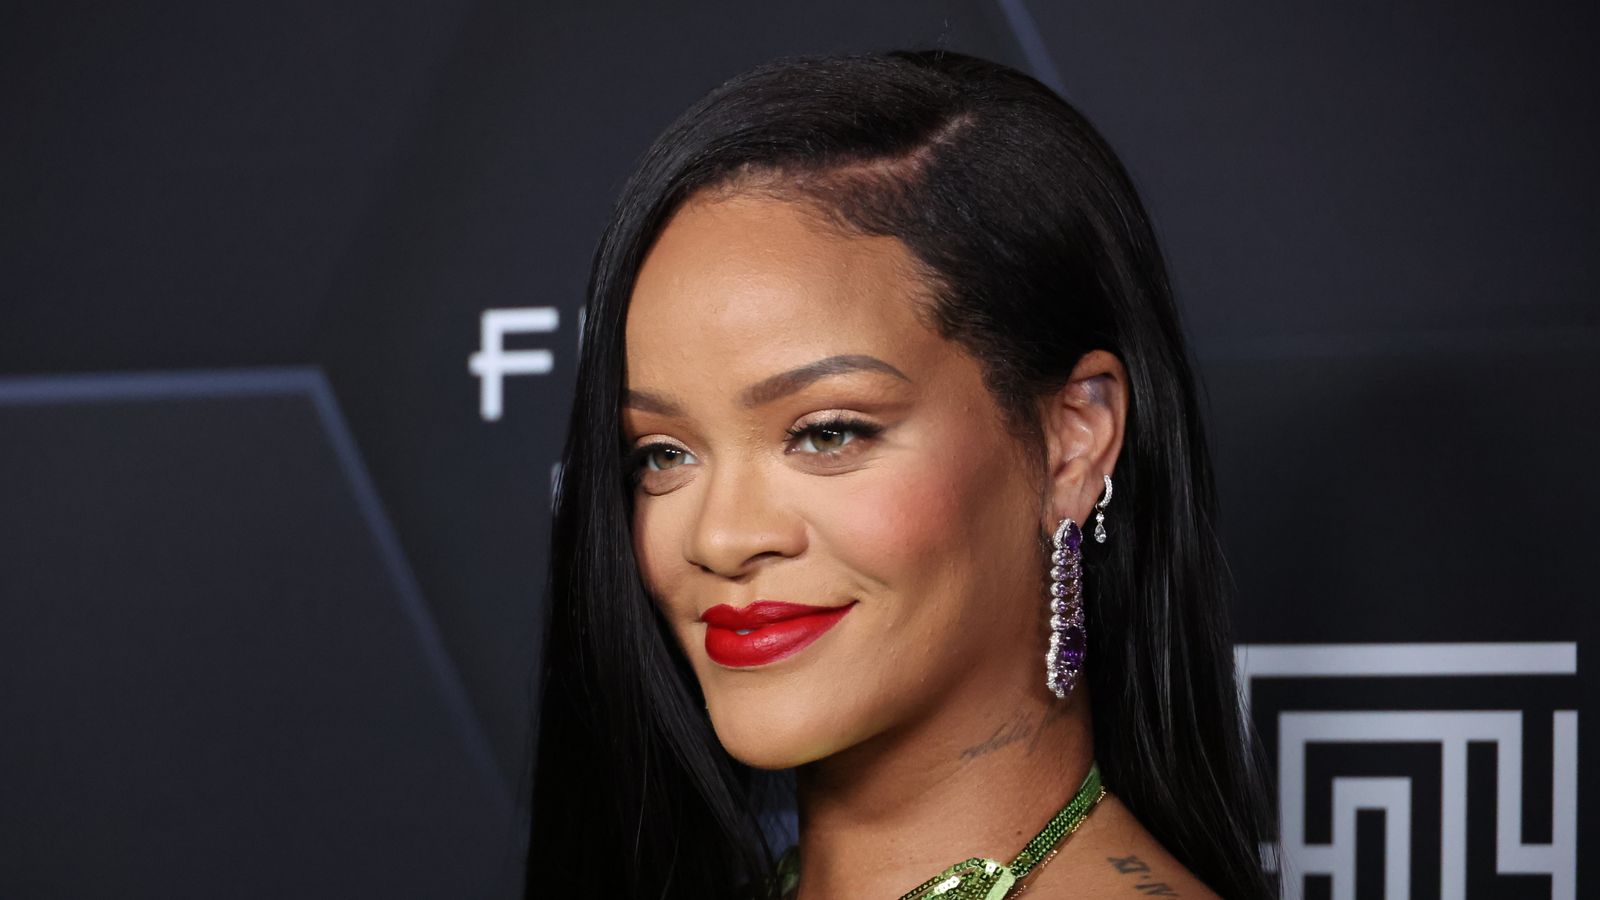 Rihanna to perform at Super Bowl LVII halftime show in Arizona and NFL